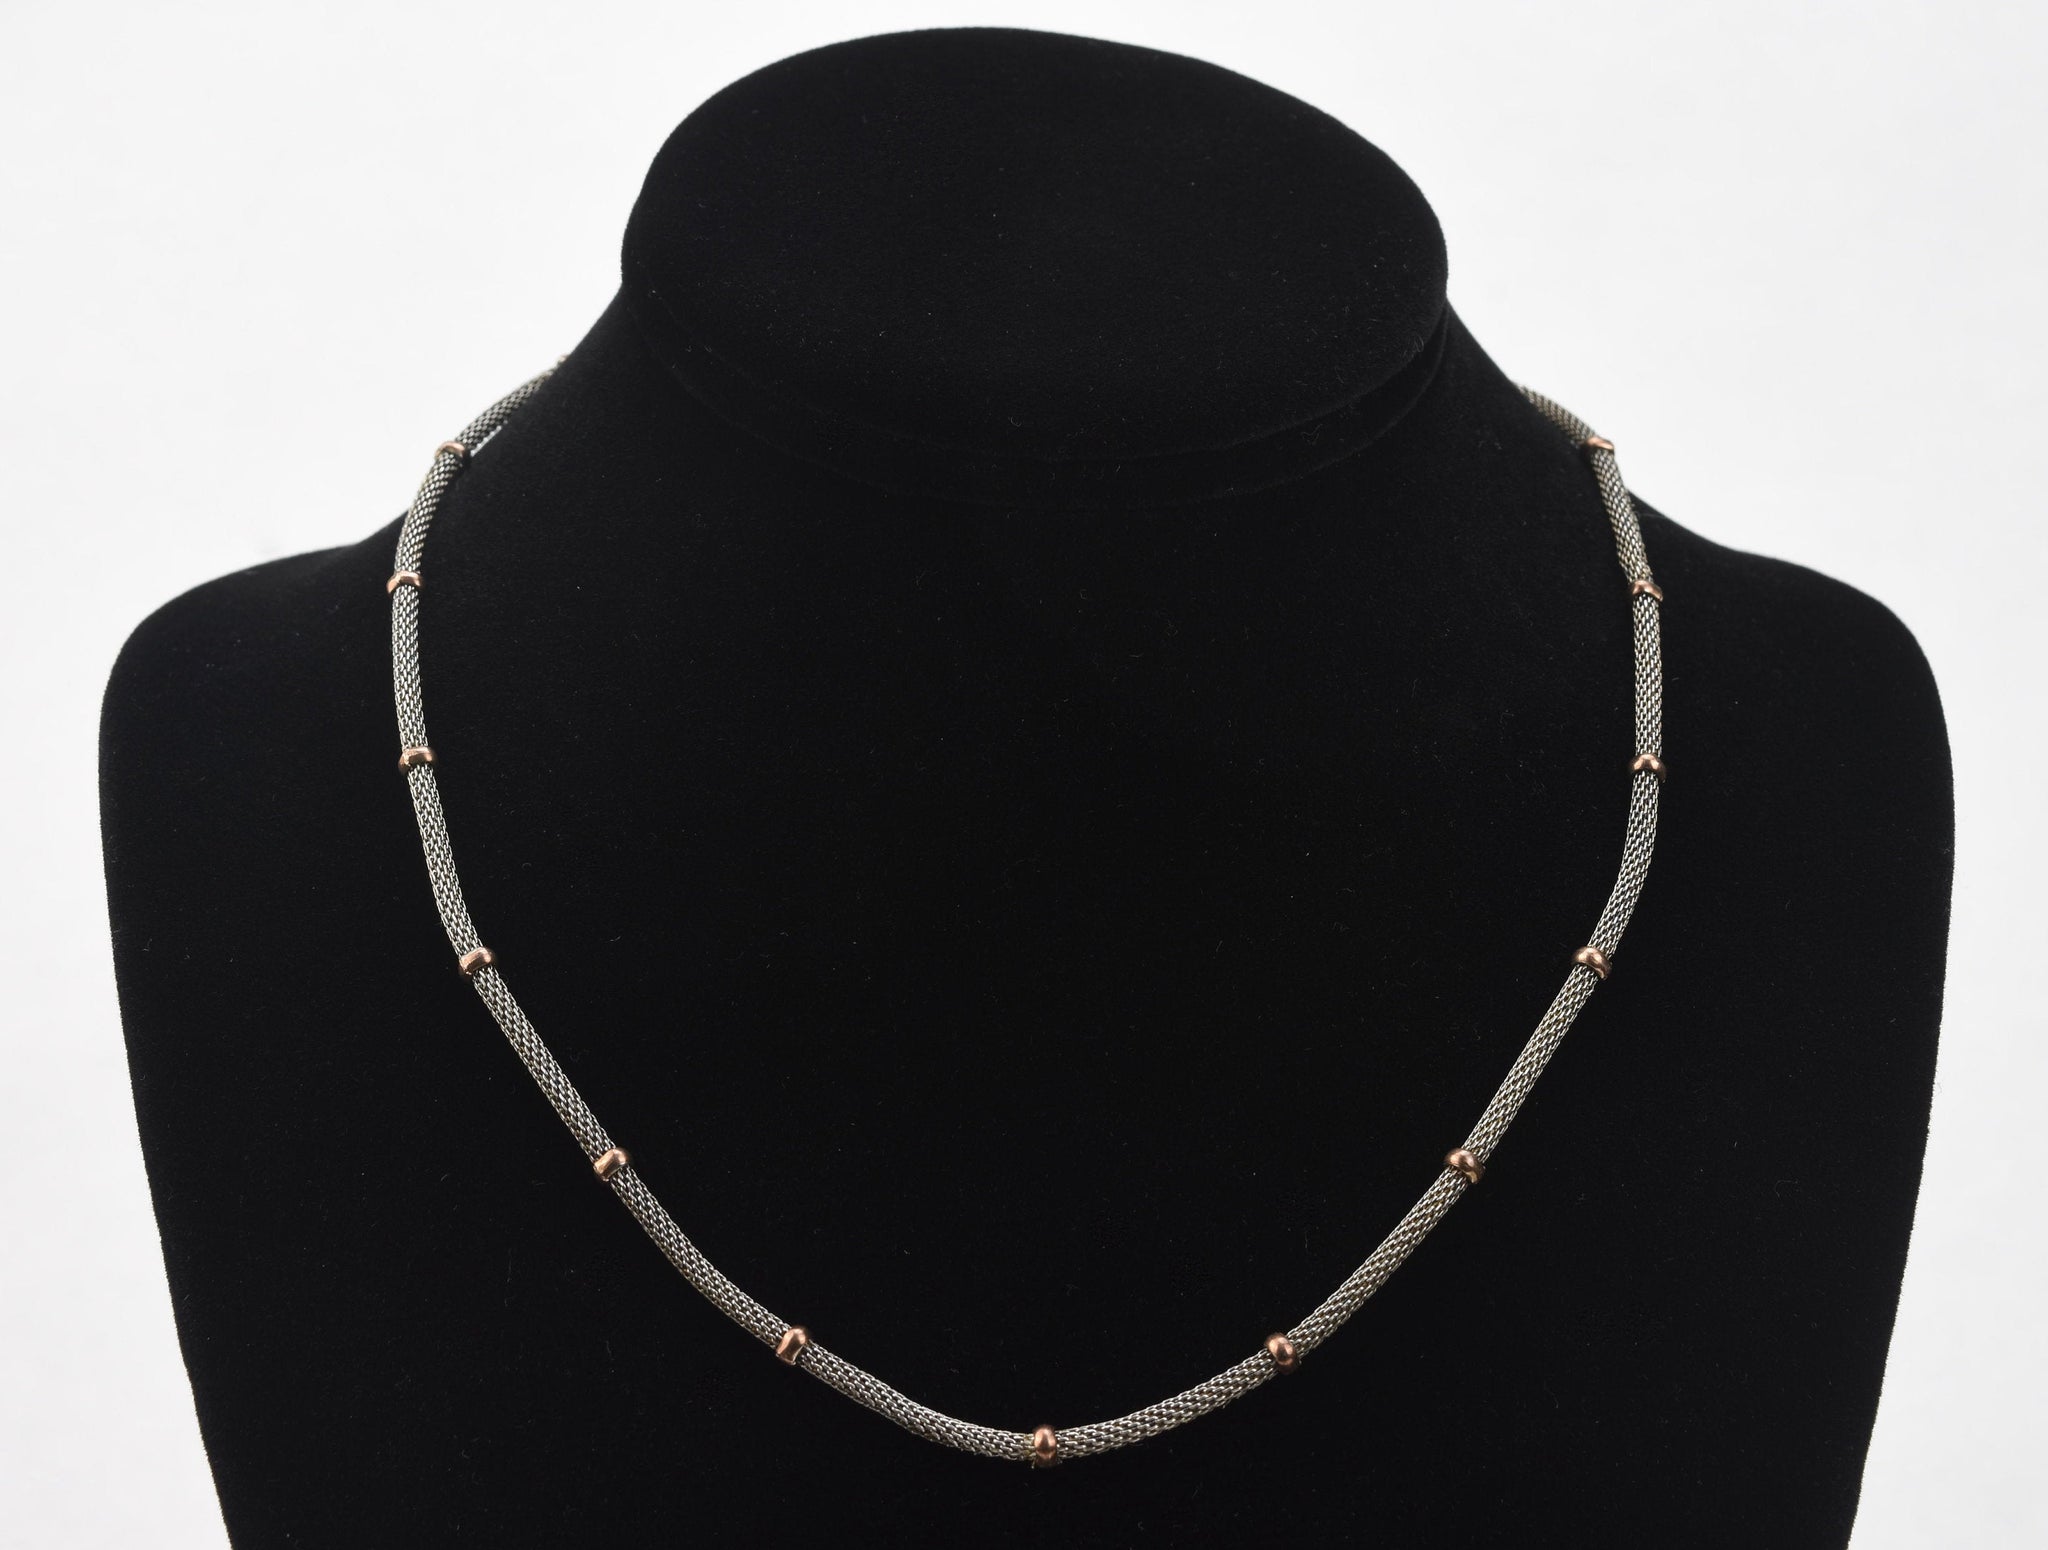 Milor - Italian Sterling Silver and Copper Bead Mesh Station Necklace - 18"